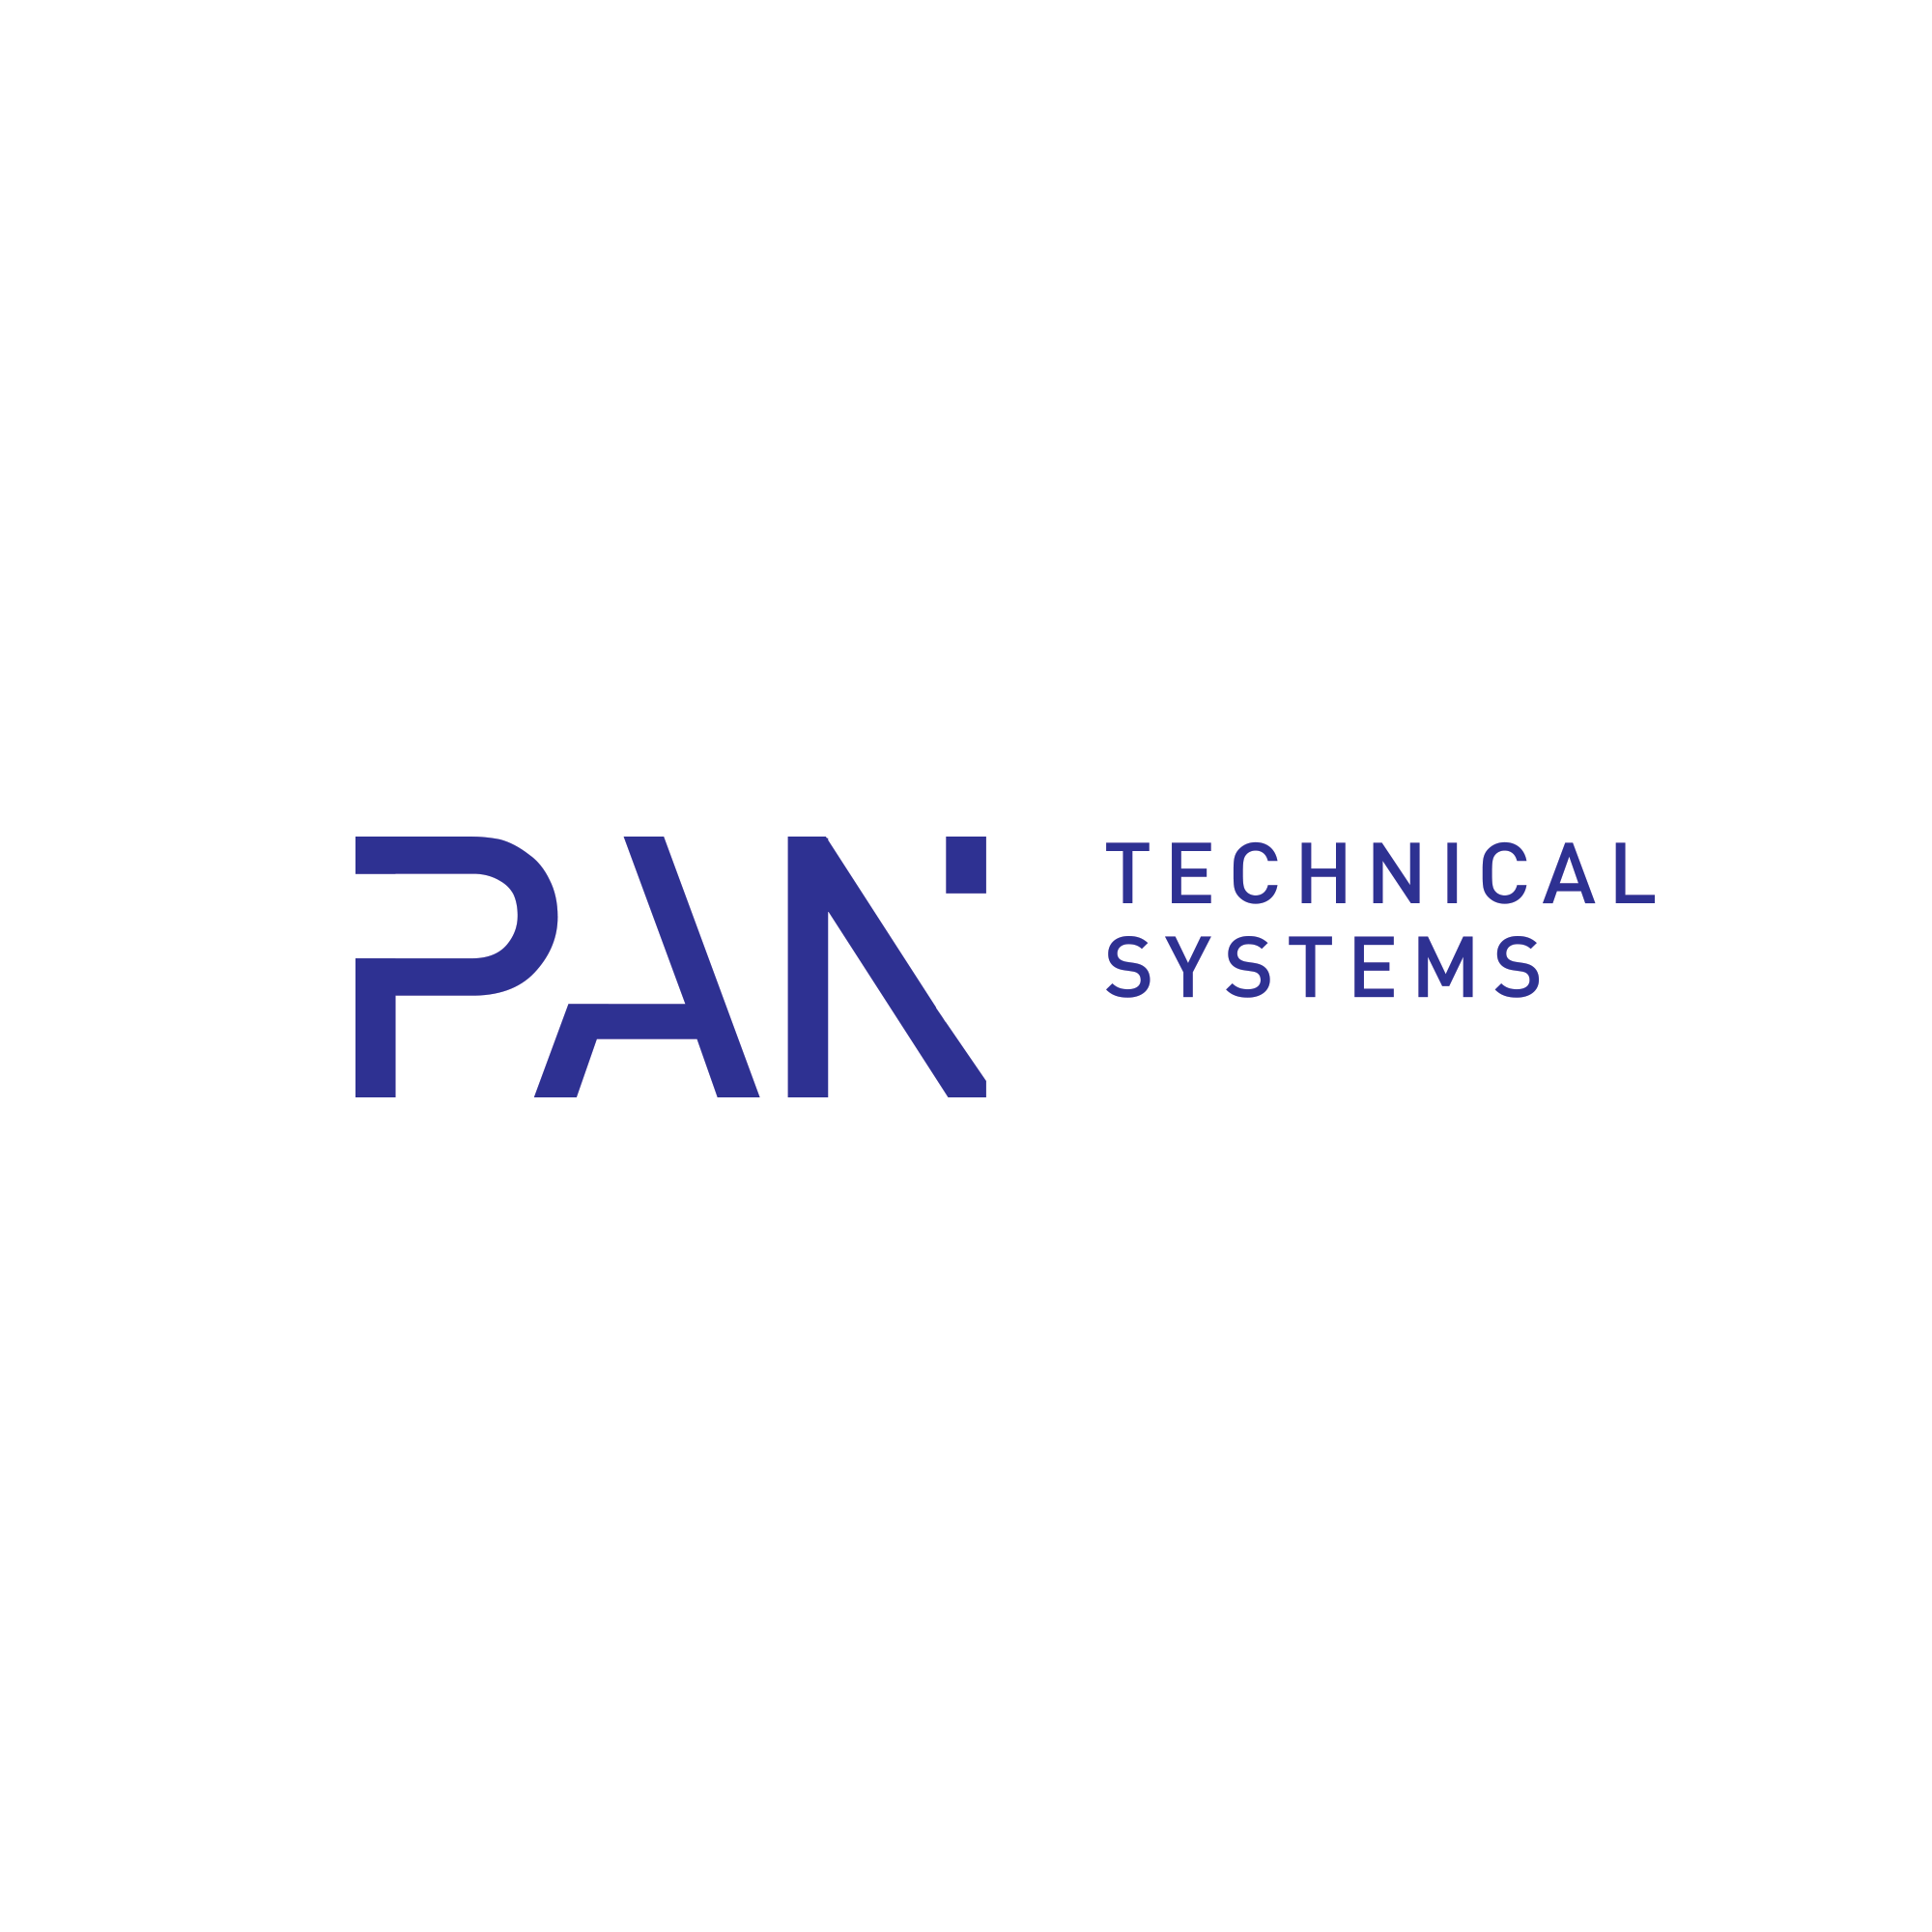 PAN TECHNCAL SYSTEMS